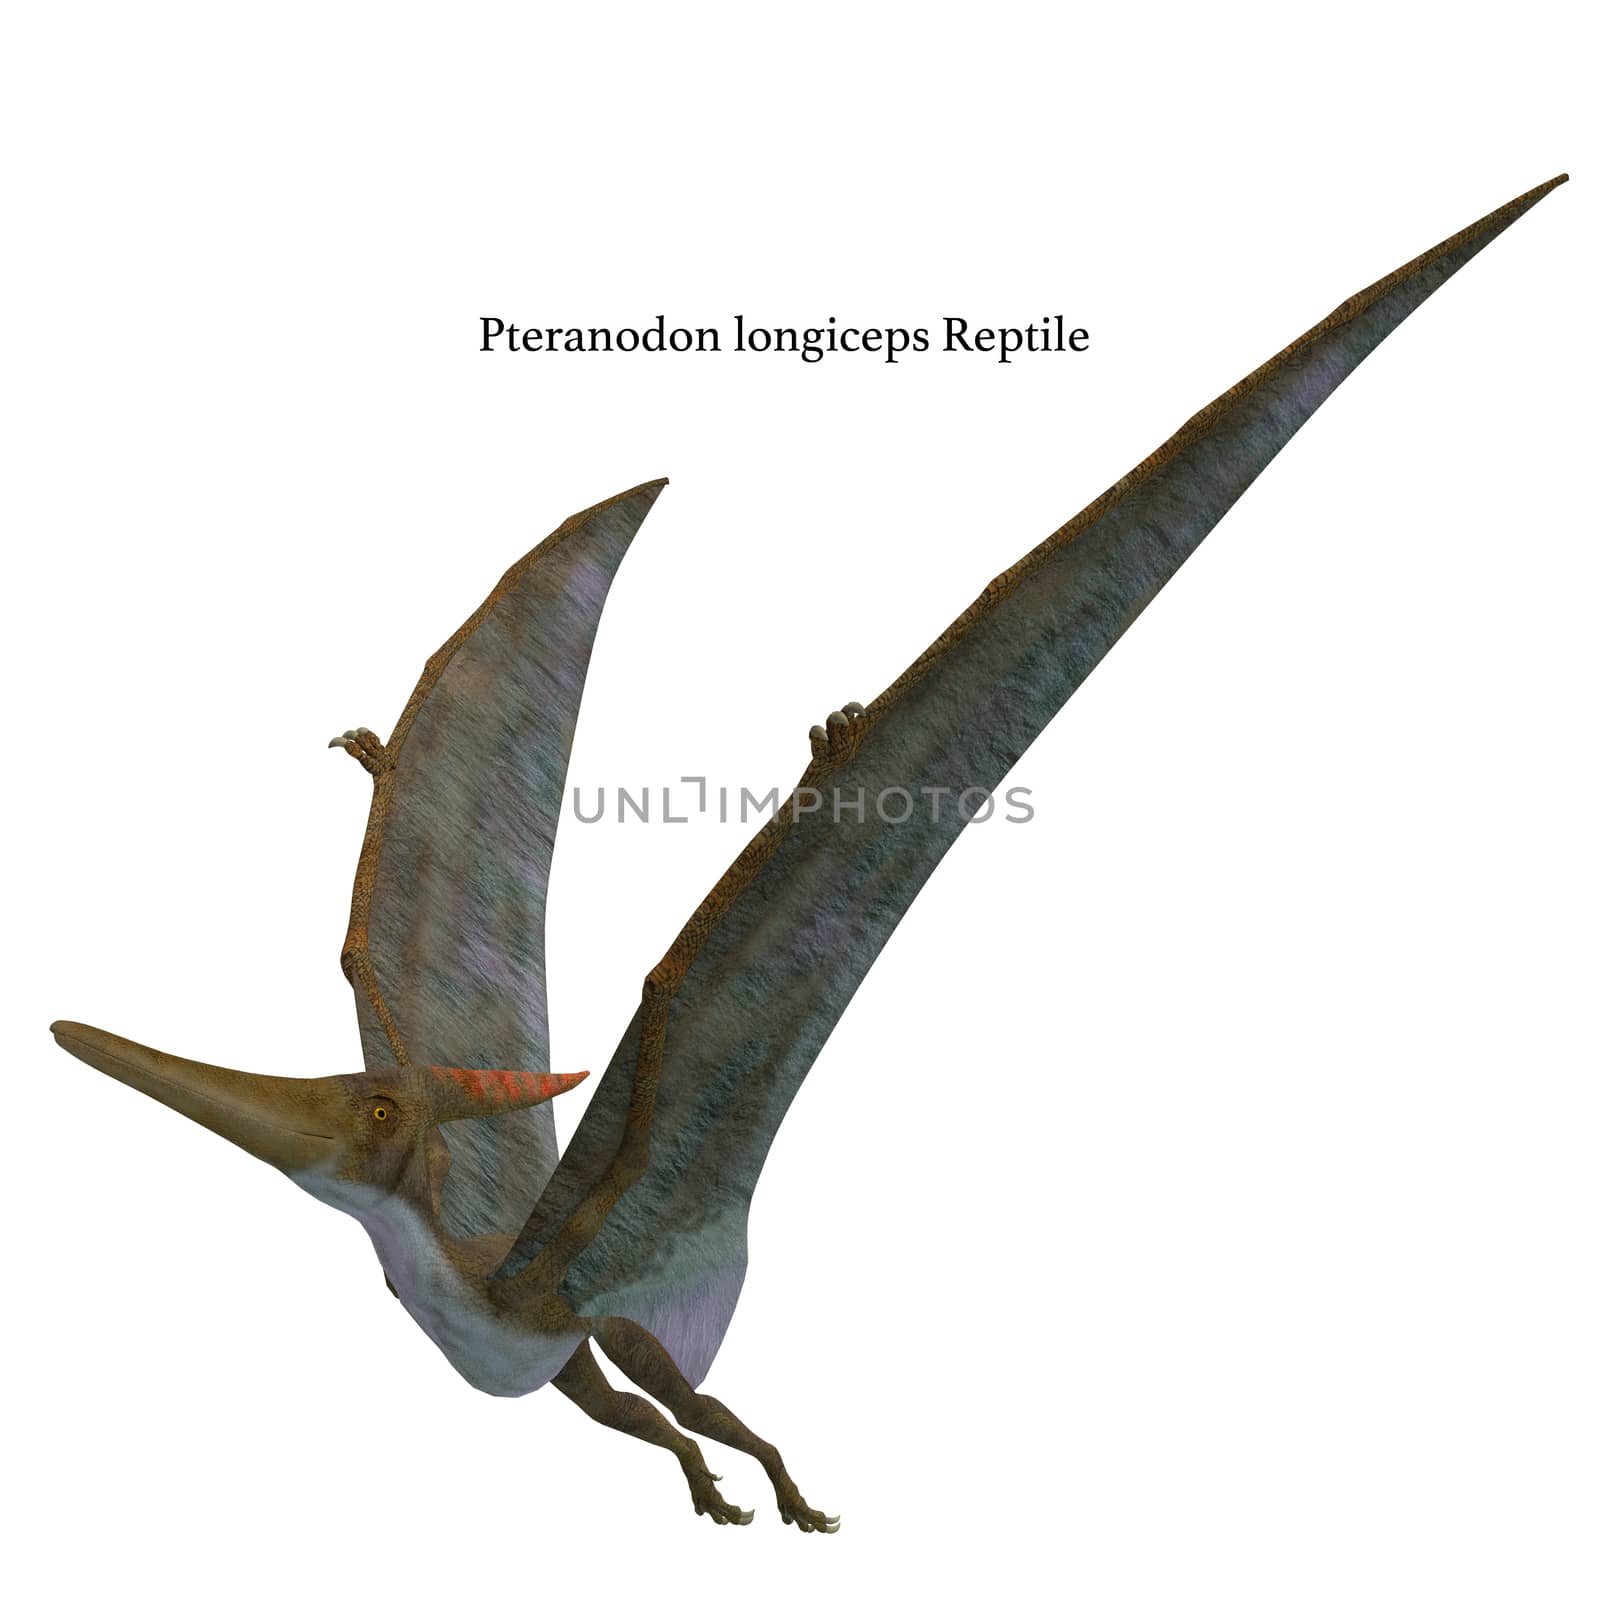 Pteranodon was a flying carnivorous reptile that lived in North America in the Cretaceous Period.